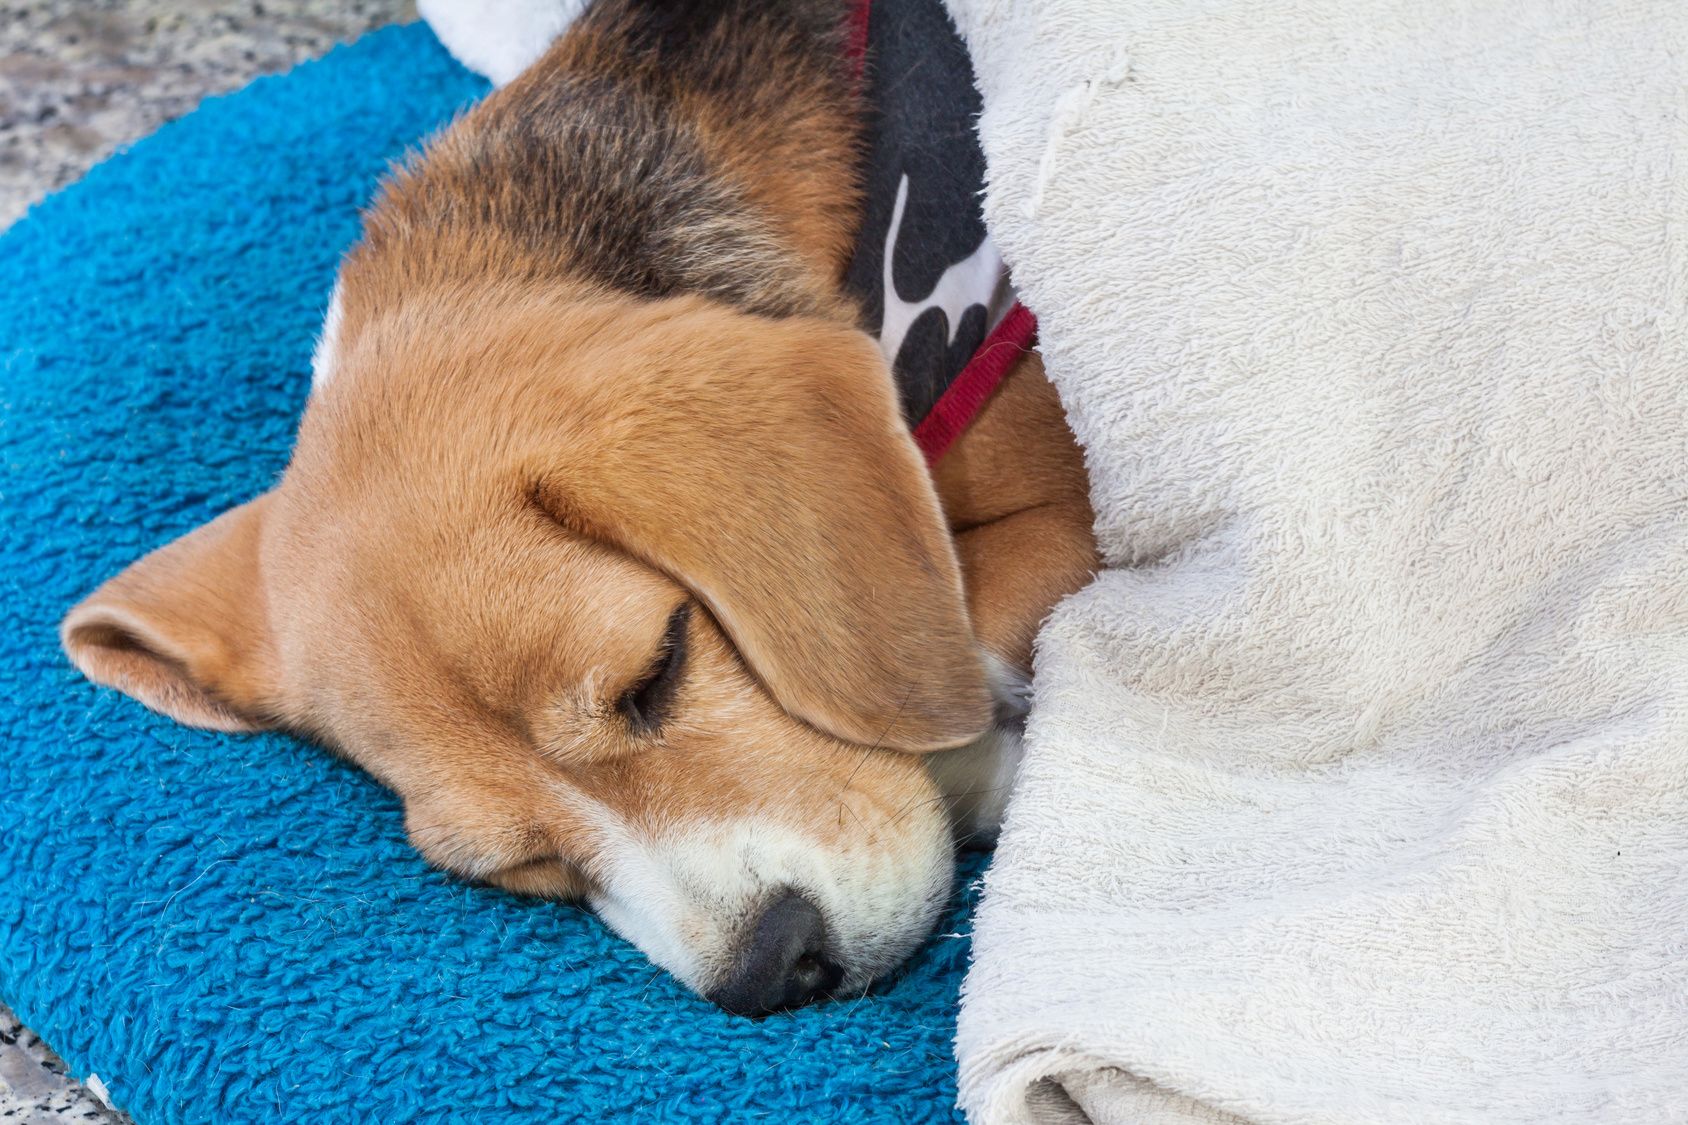 Beagle sleeping, wearing cloth,cover with blanket, on blue cusion